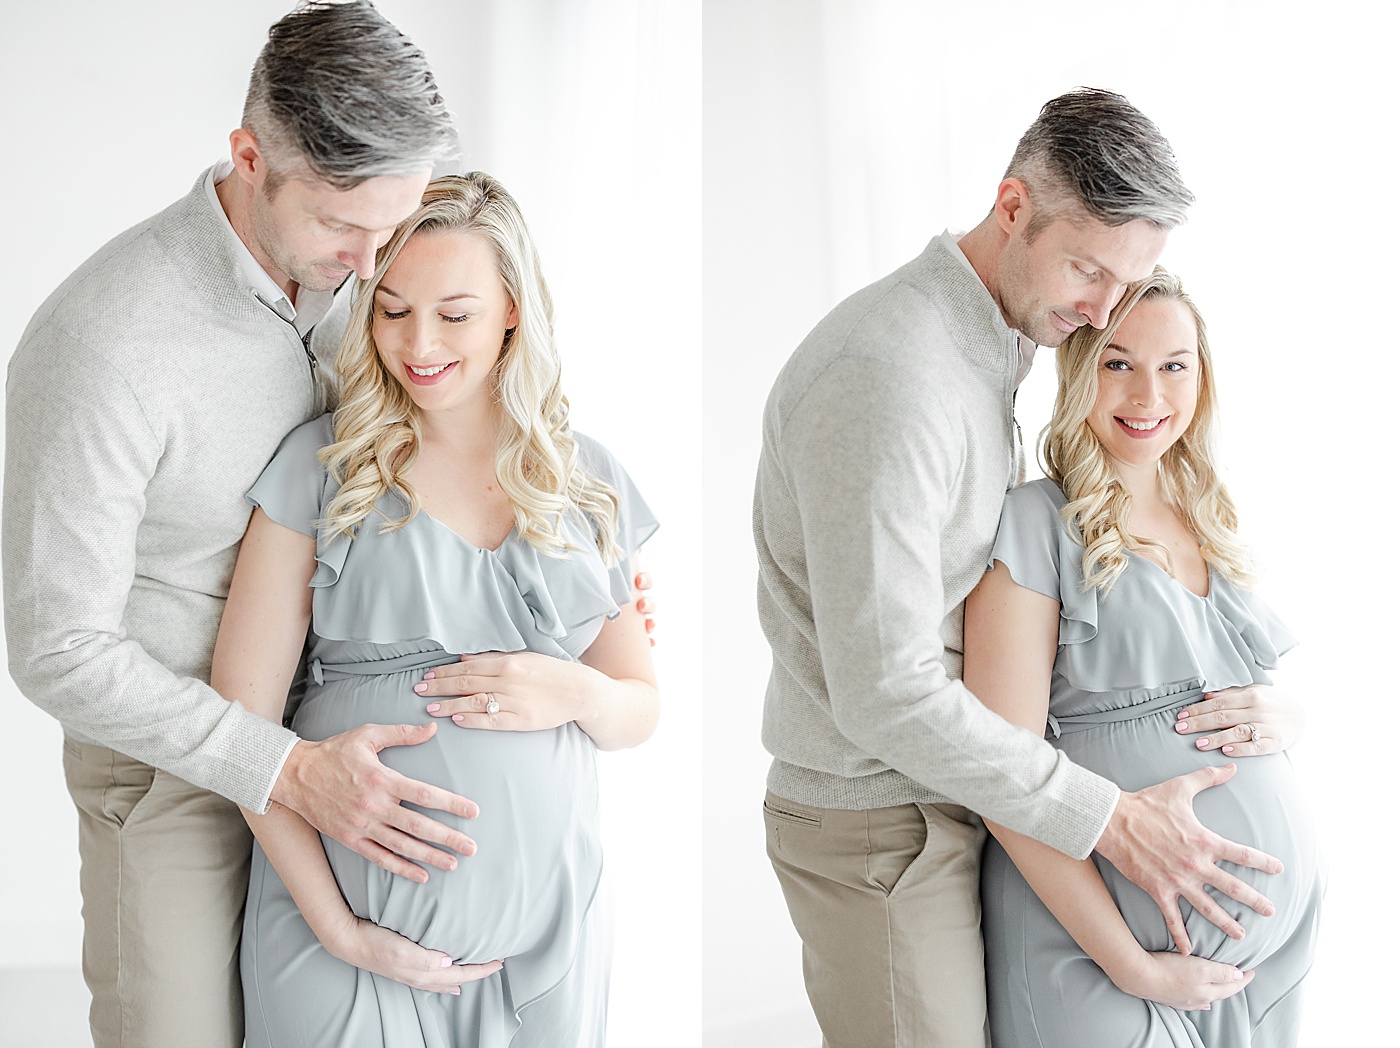 5 Reasons Why You Should Take Maternity Photos | Expecting parents of twins maternity session with Kristin Wood Photography